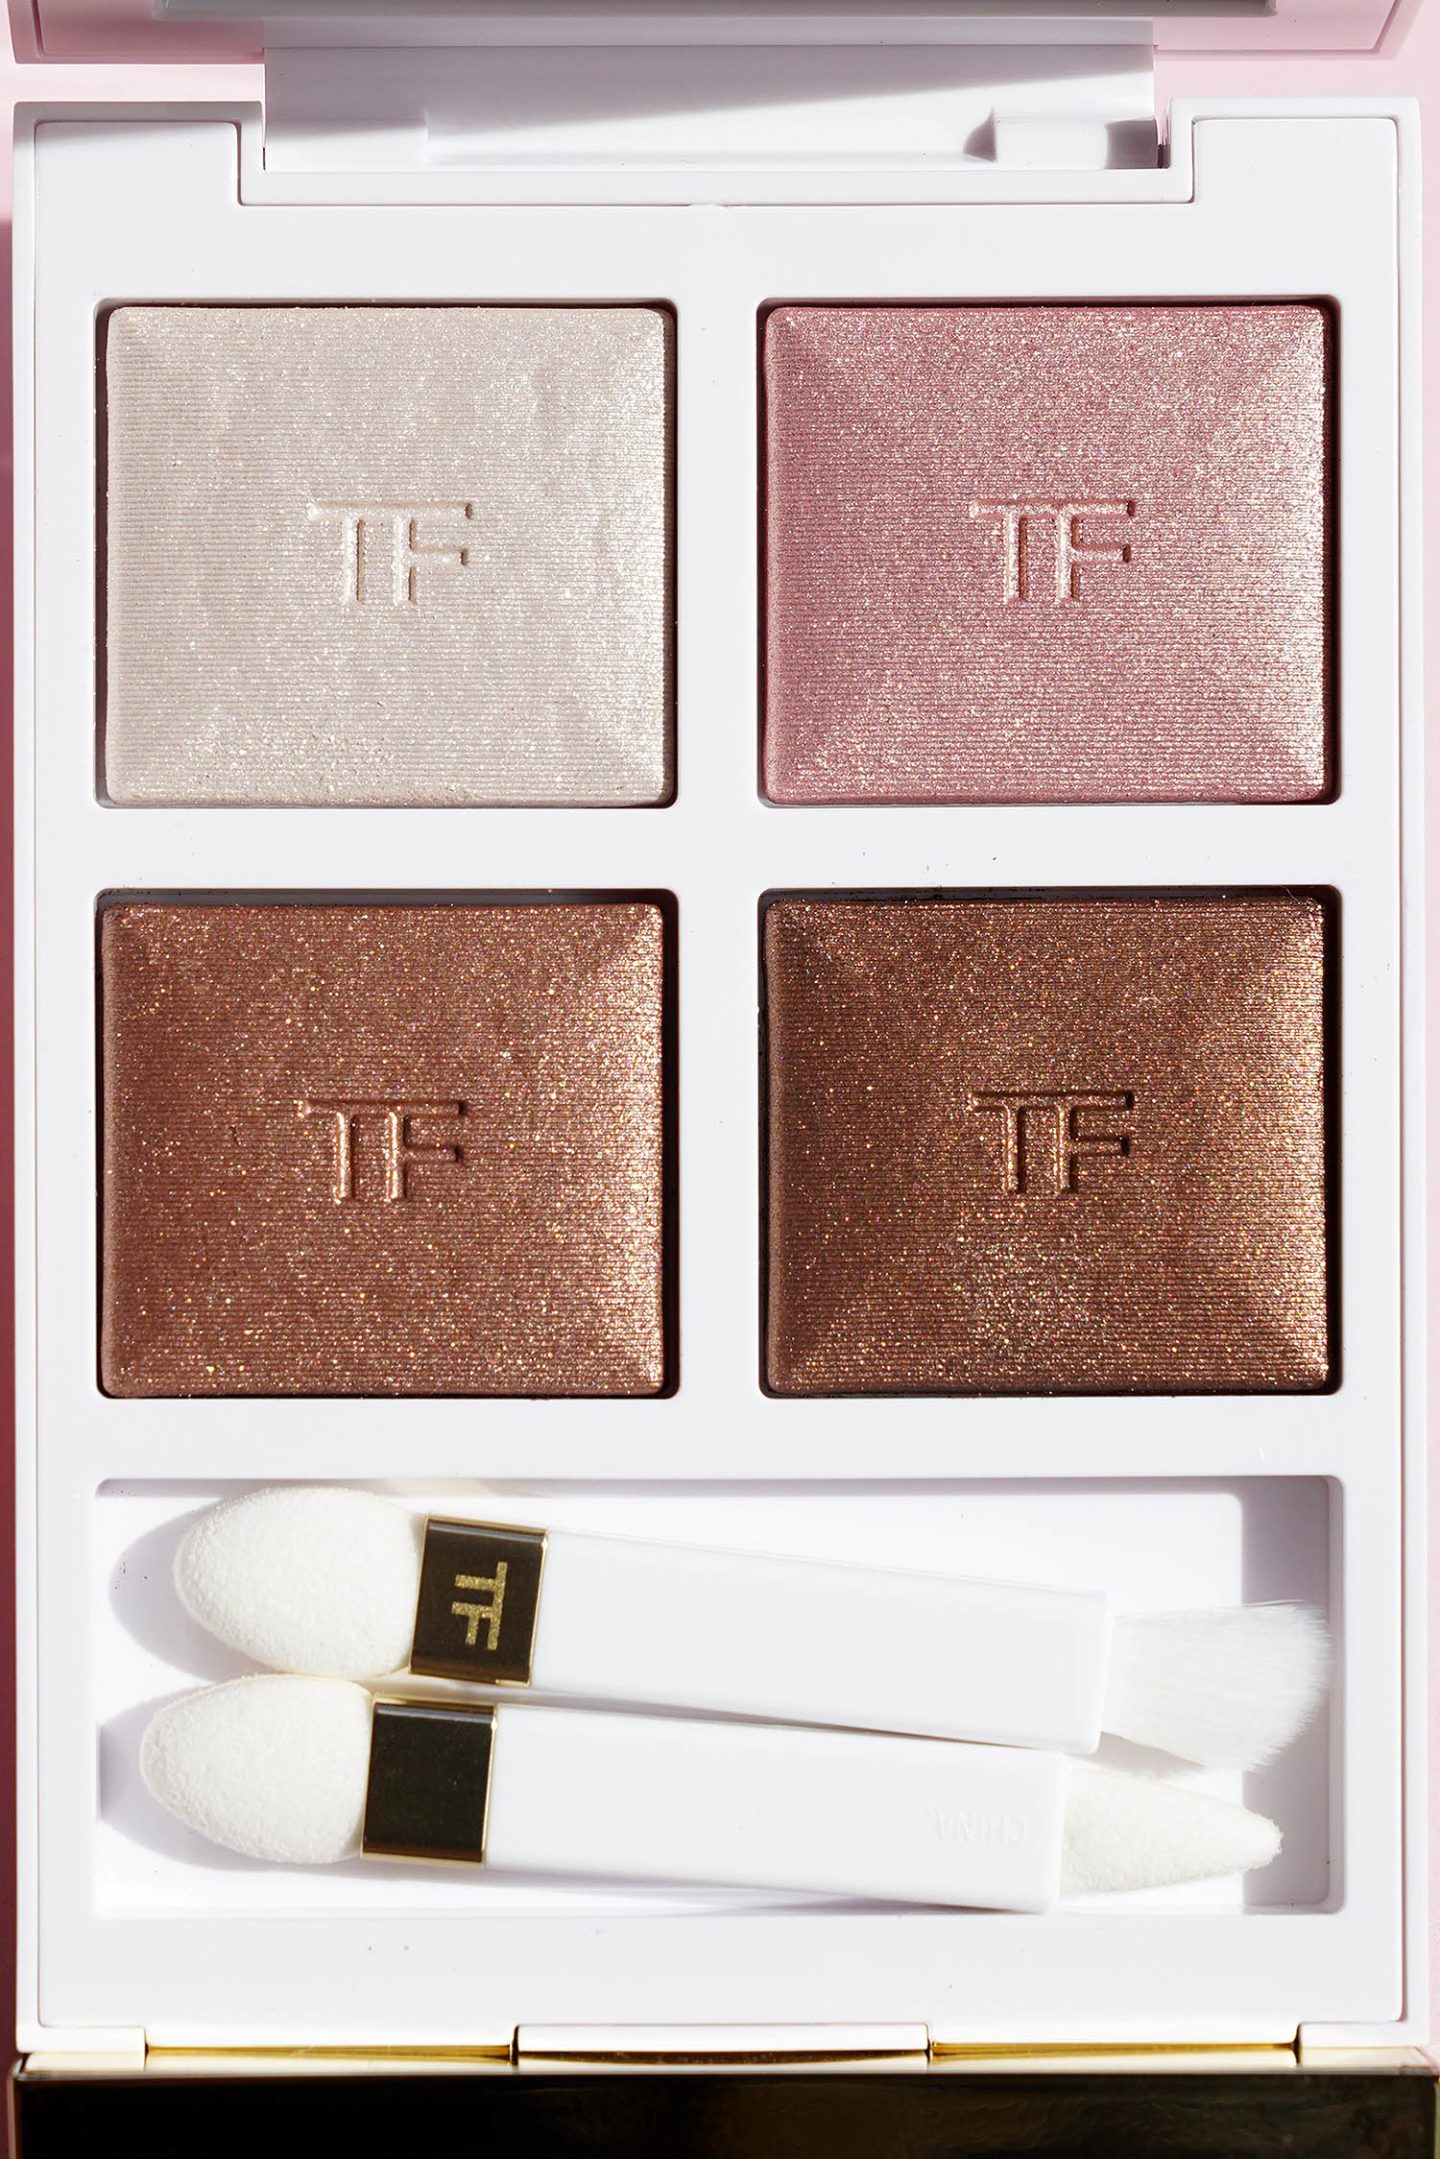 Tom Ford First Frost Eyeshadow Quad | The Beauty Look Book